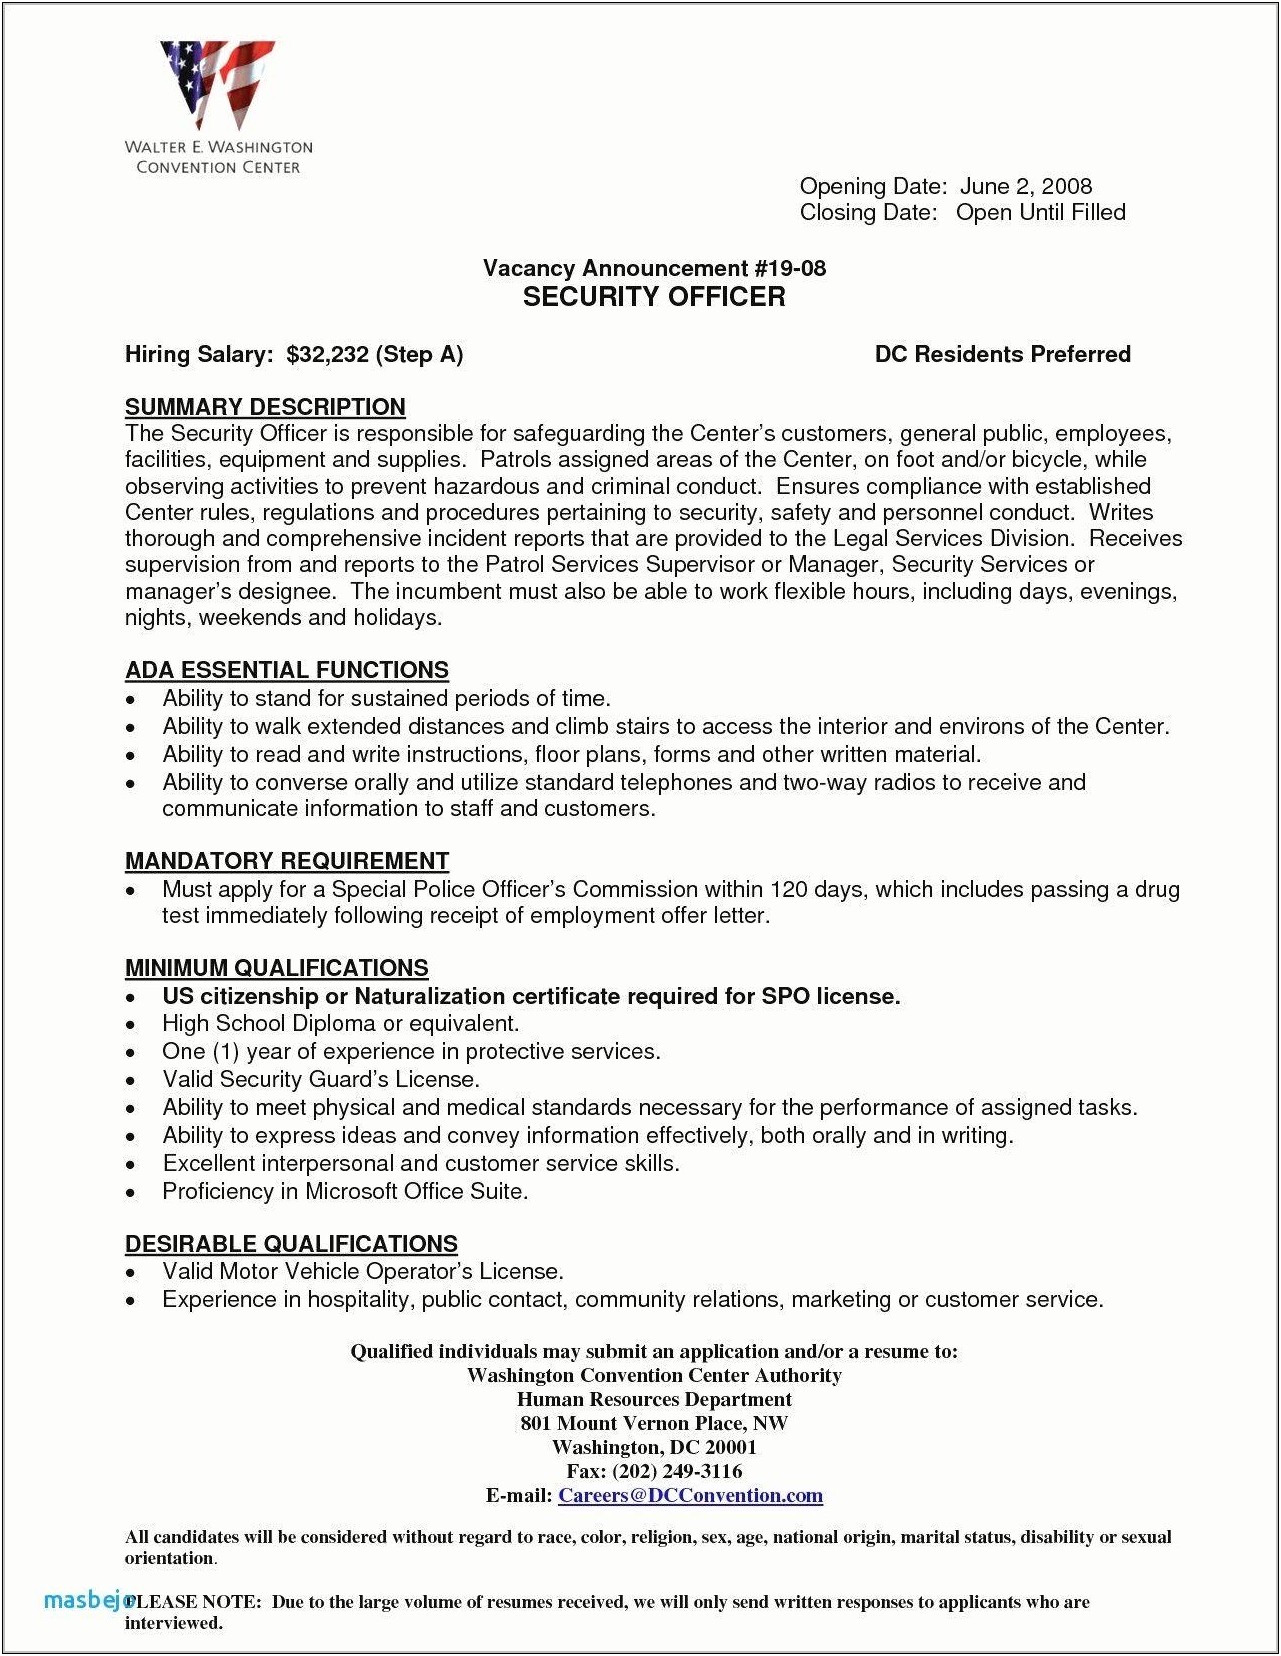 Examples Of Resumes For Security Officer Jobs